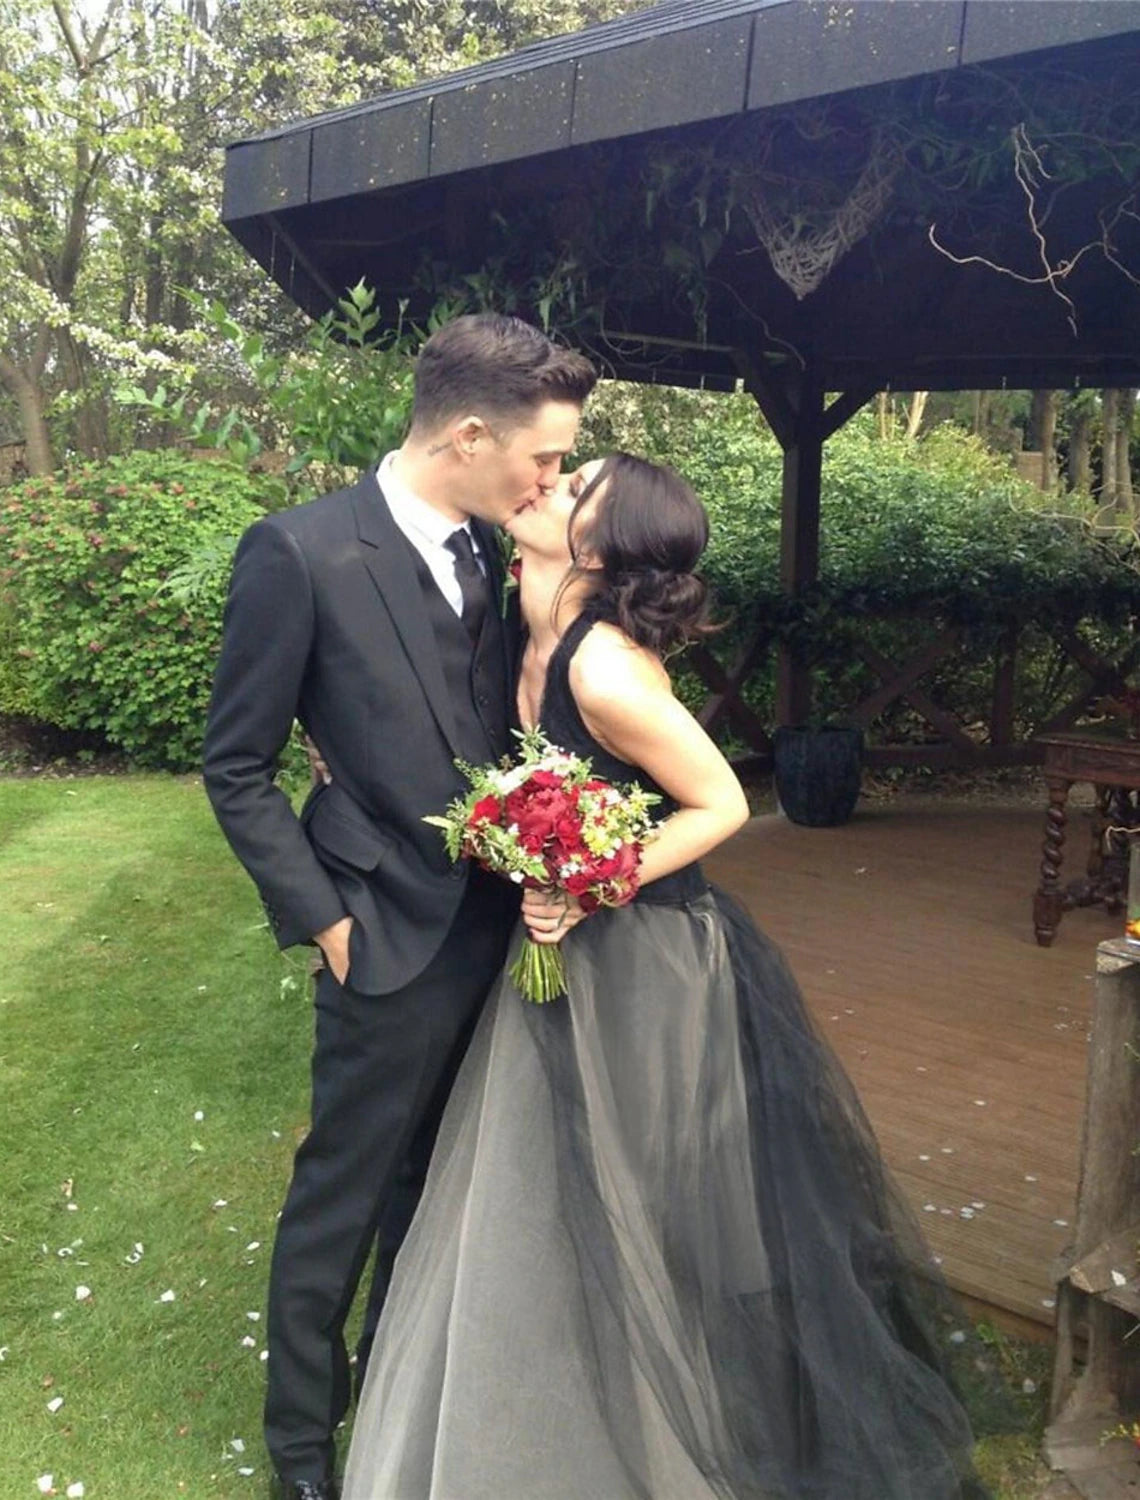 Engagement Gothic Wedding Dresses in Color Formal Wedding Dresses A-Line Halter Sleeveless Floor Length Satin Bridal Gowns With Appliques